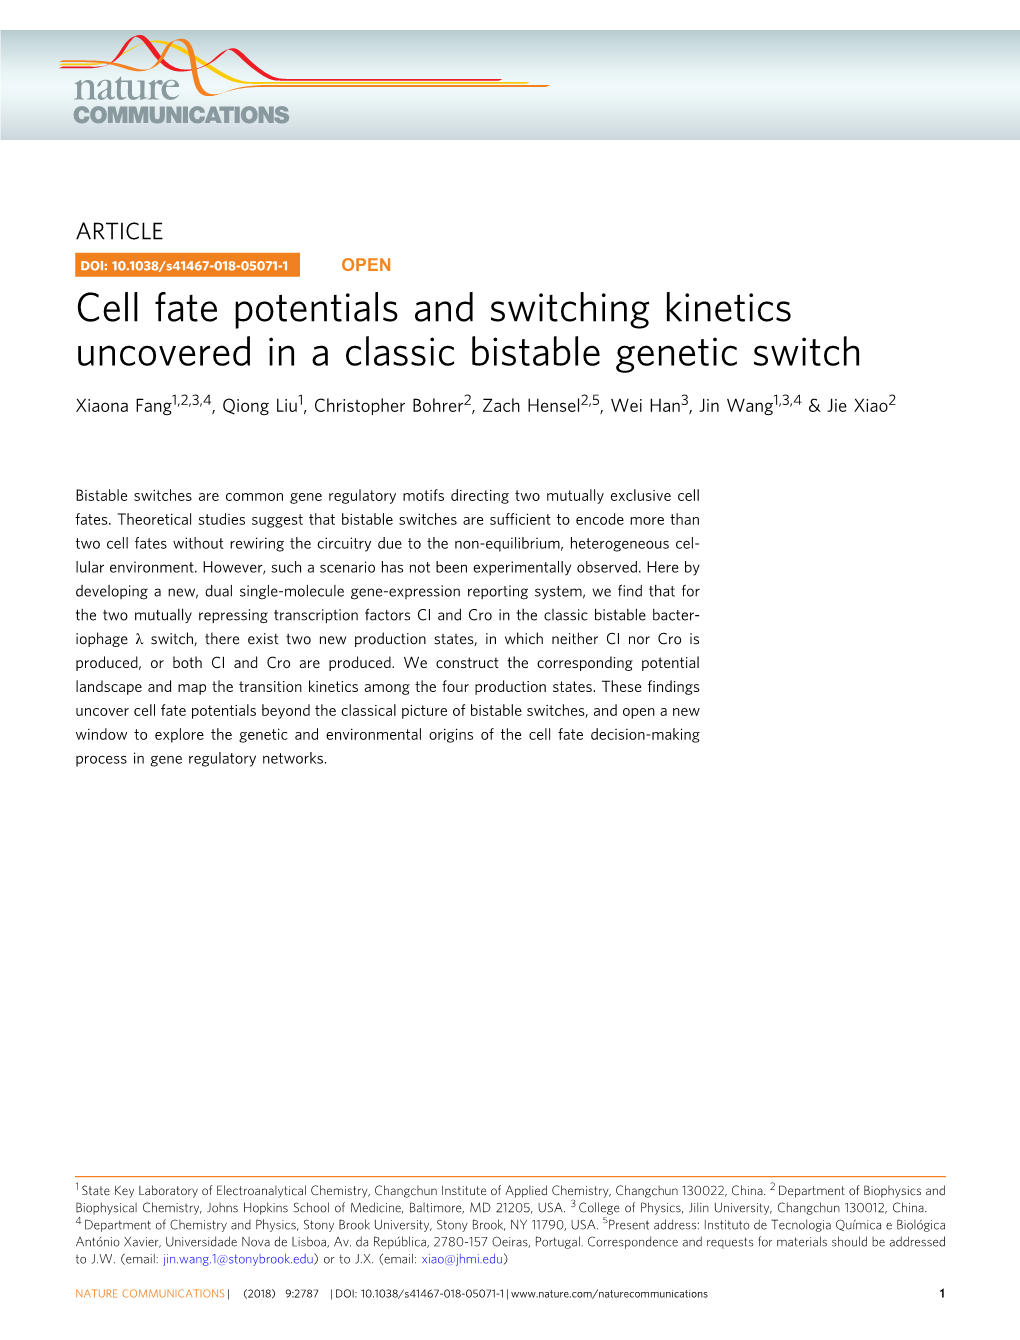 Cell Fate Potentials and Switching Kinetics Uncovered in a Classic Bistable Genetic Switch